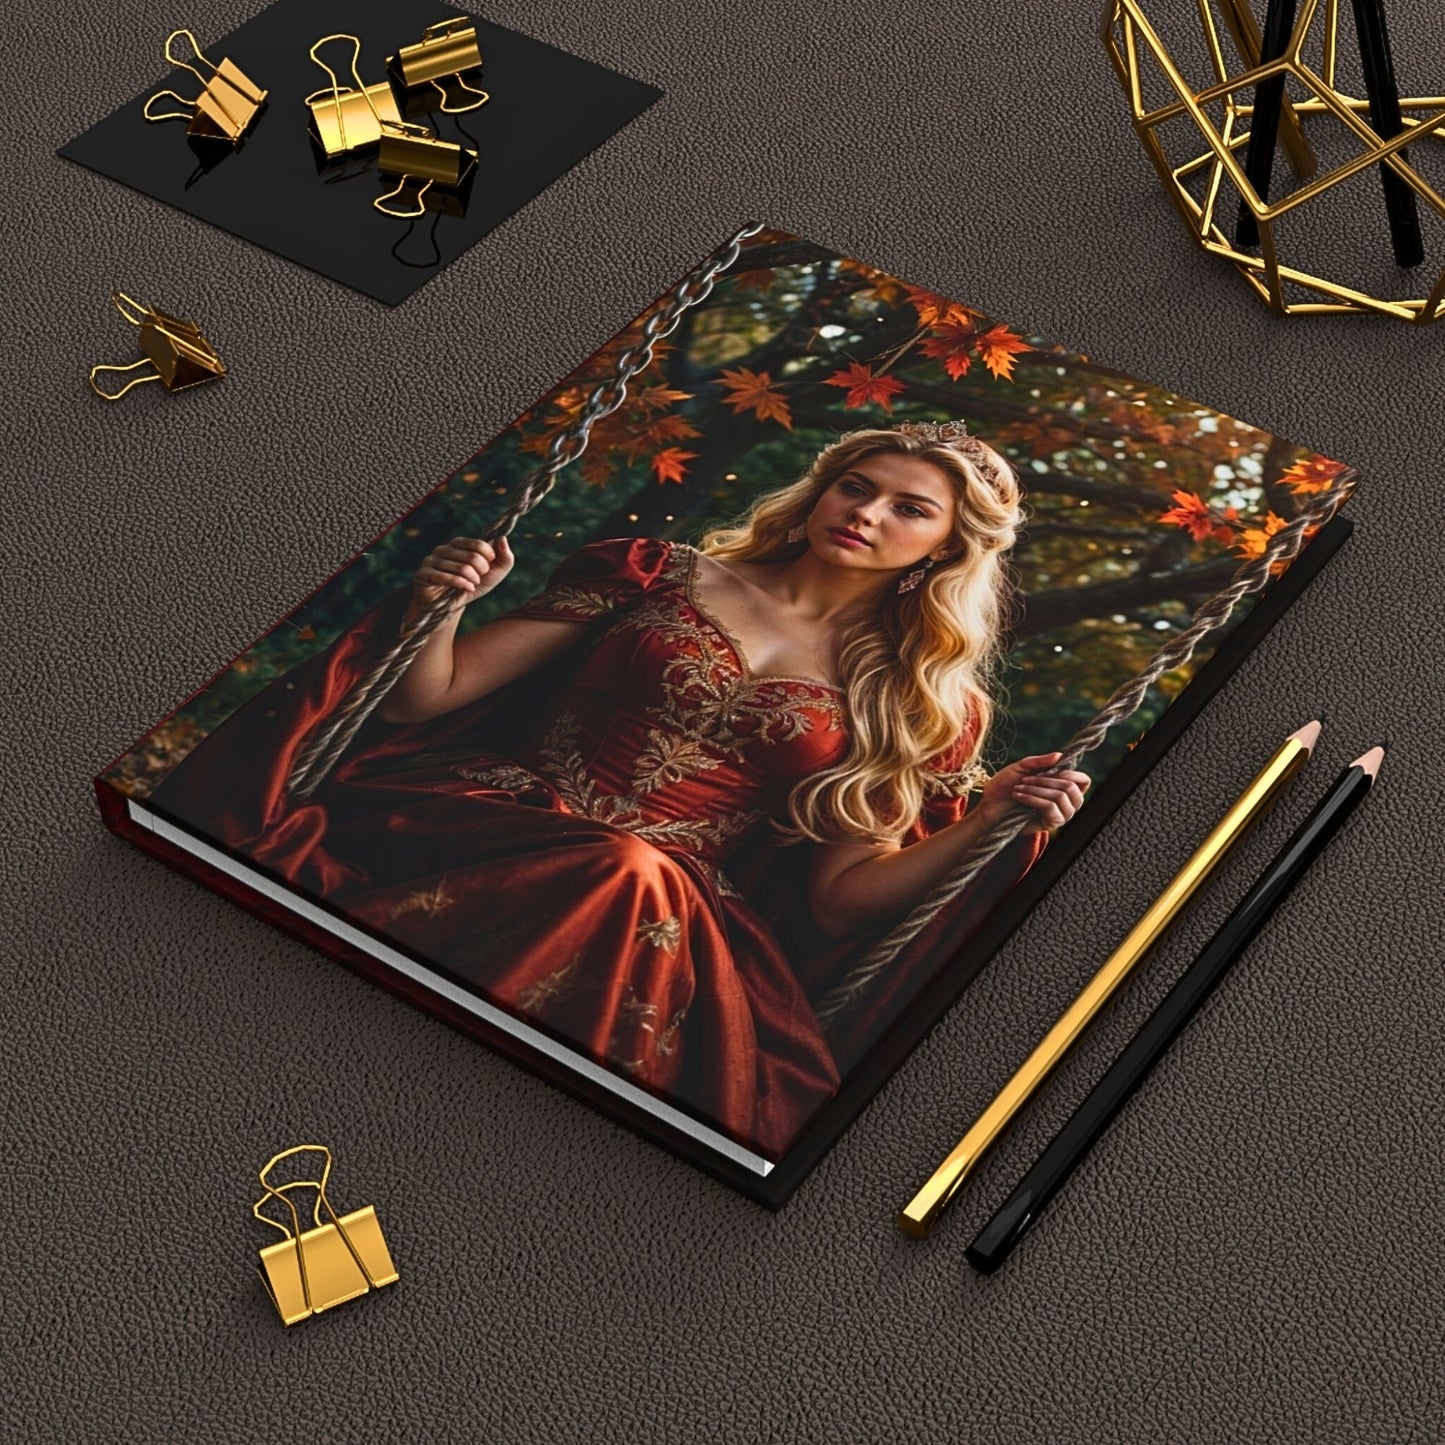 Explore royal puzzle art with our custom Queen Journal, tailored for the special women in your life. Whether it’s a personalized notebook, letters for your wife or girlfriend, or a cherished wedding anniversary gift, our Personalised Manor Wife Journal offers a unique way to celebrate her.